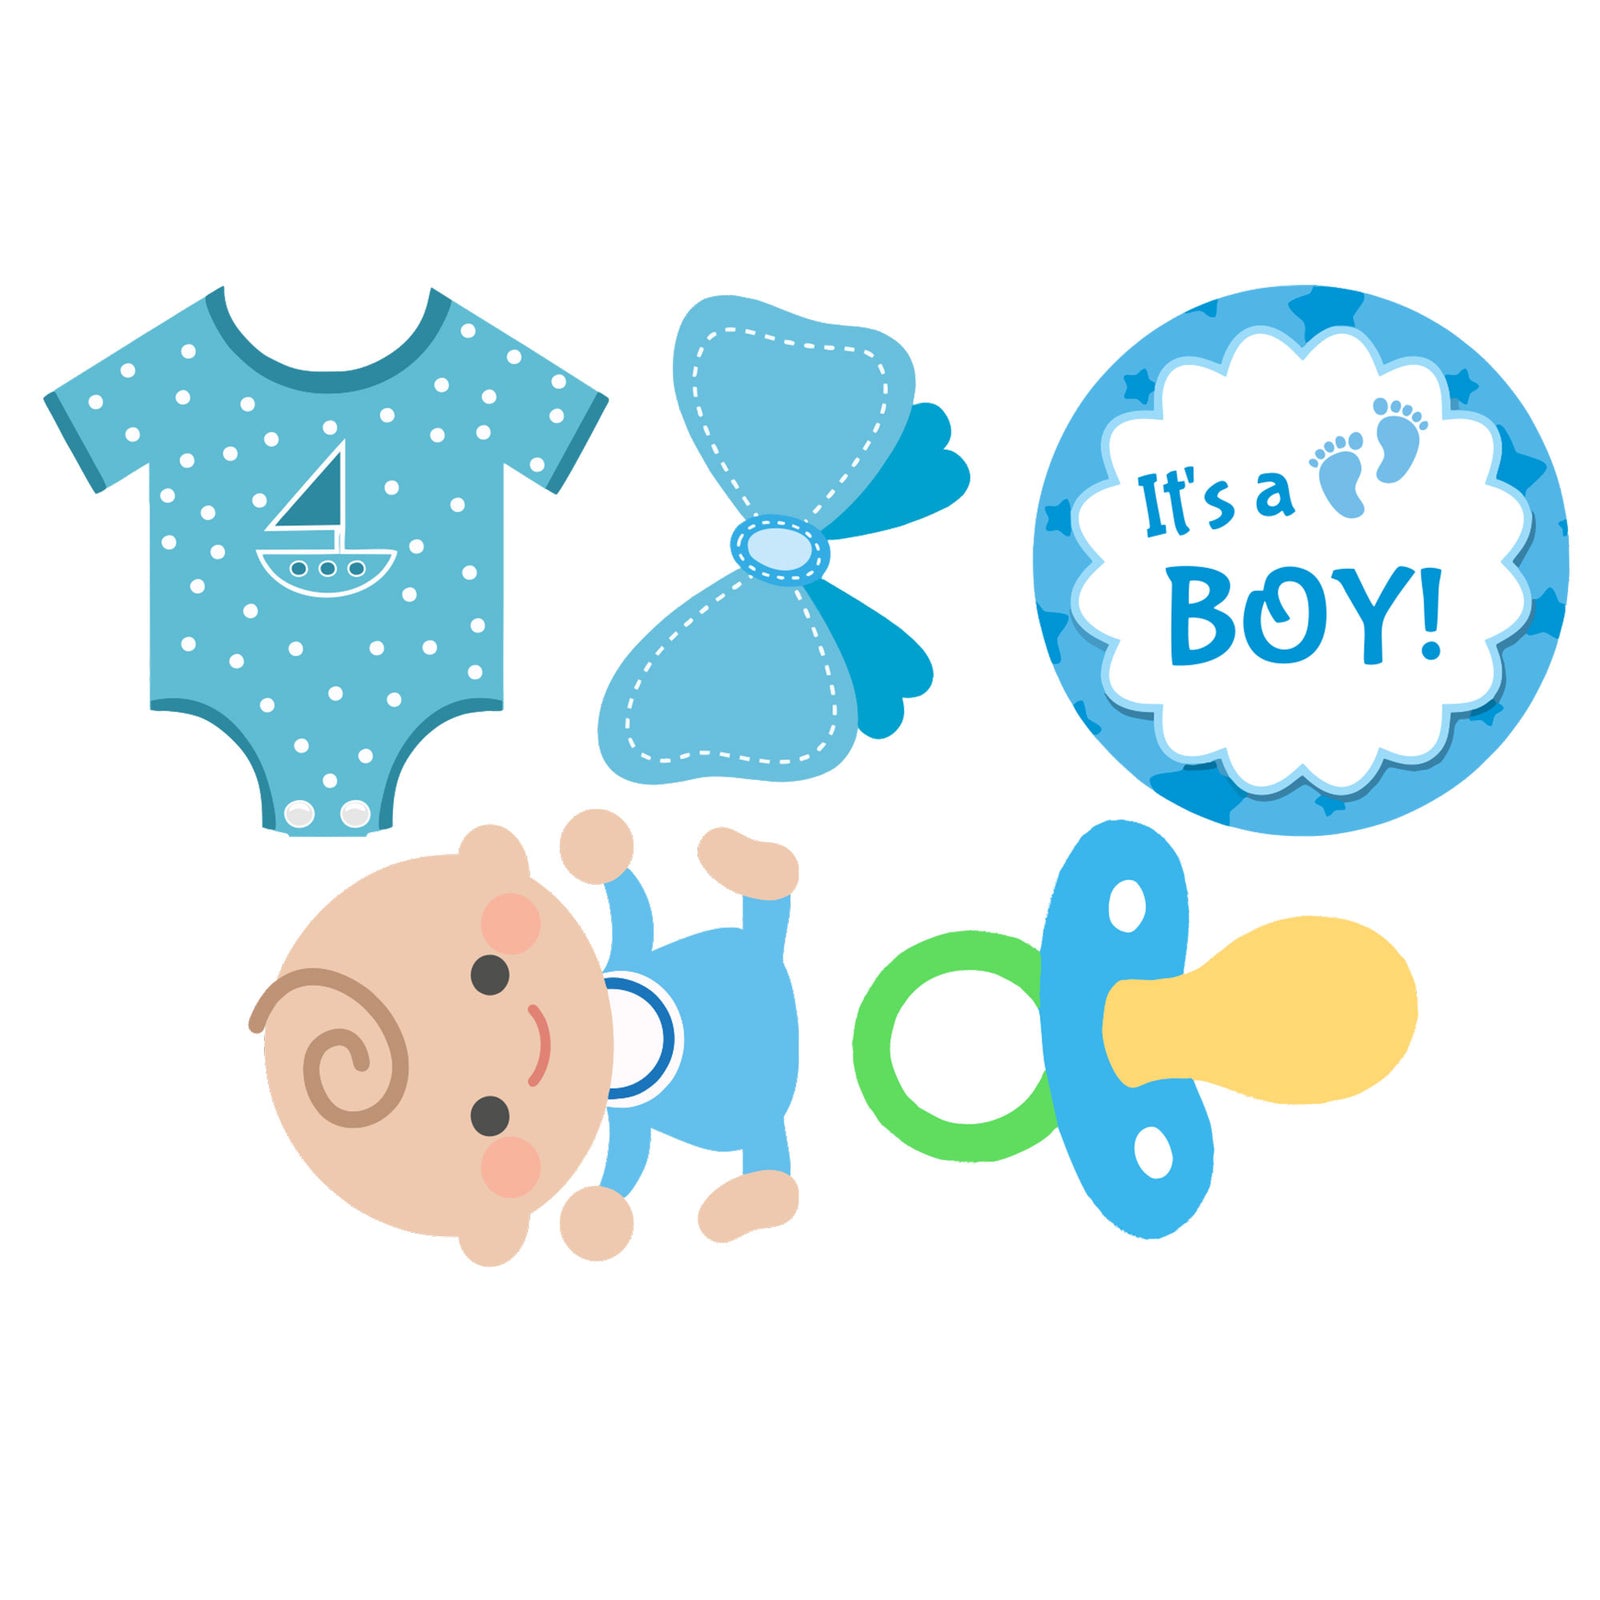 Its A Boy - Cut Out - Party Decor Mall (10 Pieces)